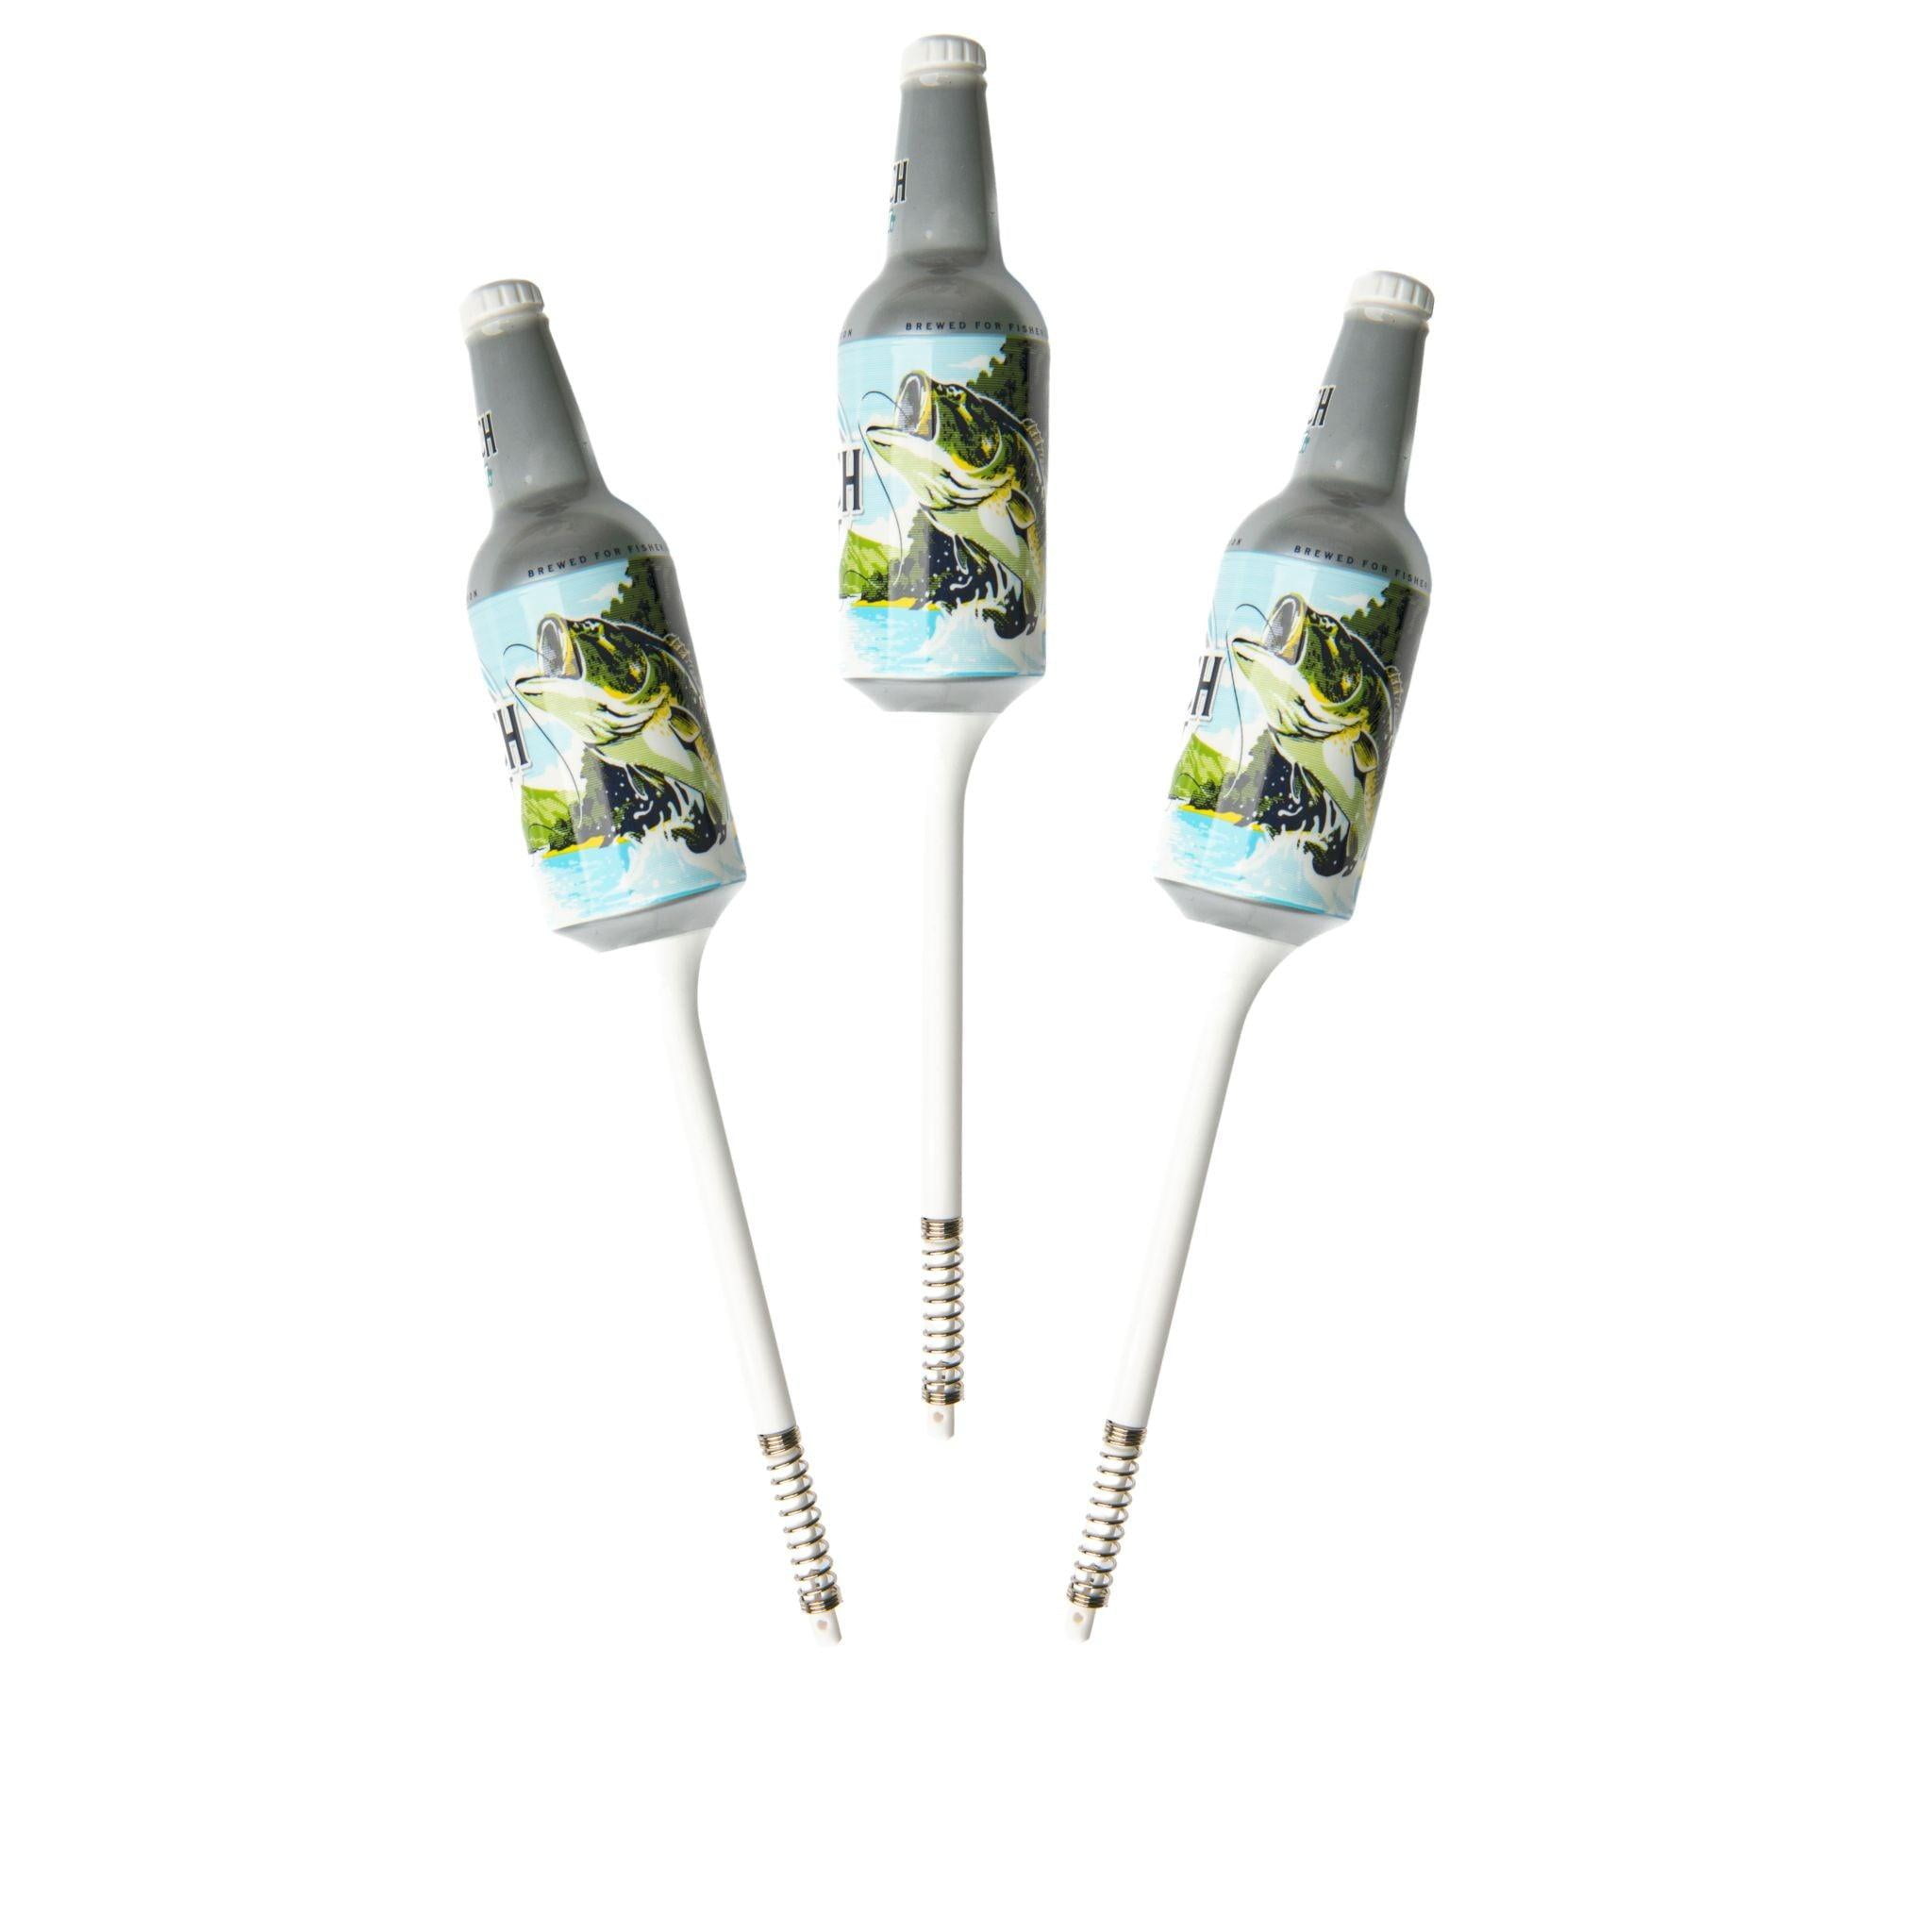 Busch Light Limited Edition Beer Fishing Bobbers 3 Pack- Prime